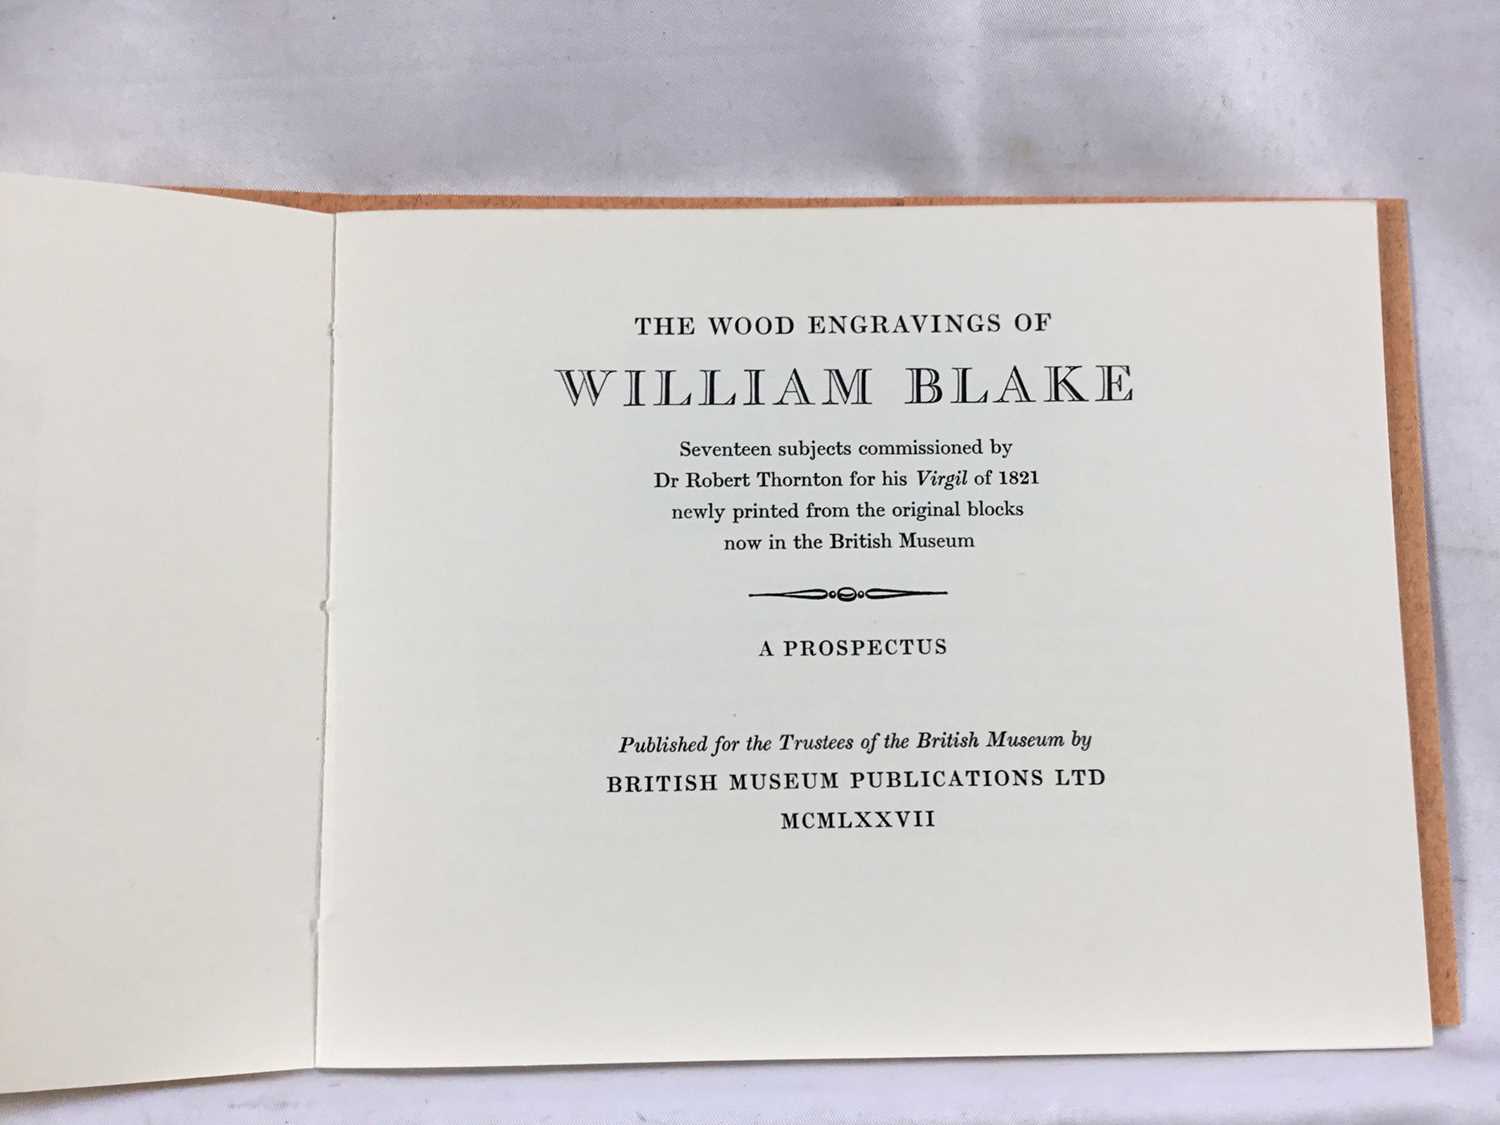 The Wood Engravings of William Blake - A Prospectus, 1977, together with one loose woodblock and thr - Image 9 of 10